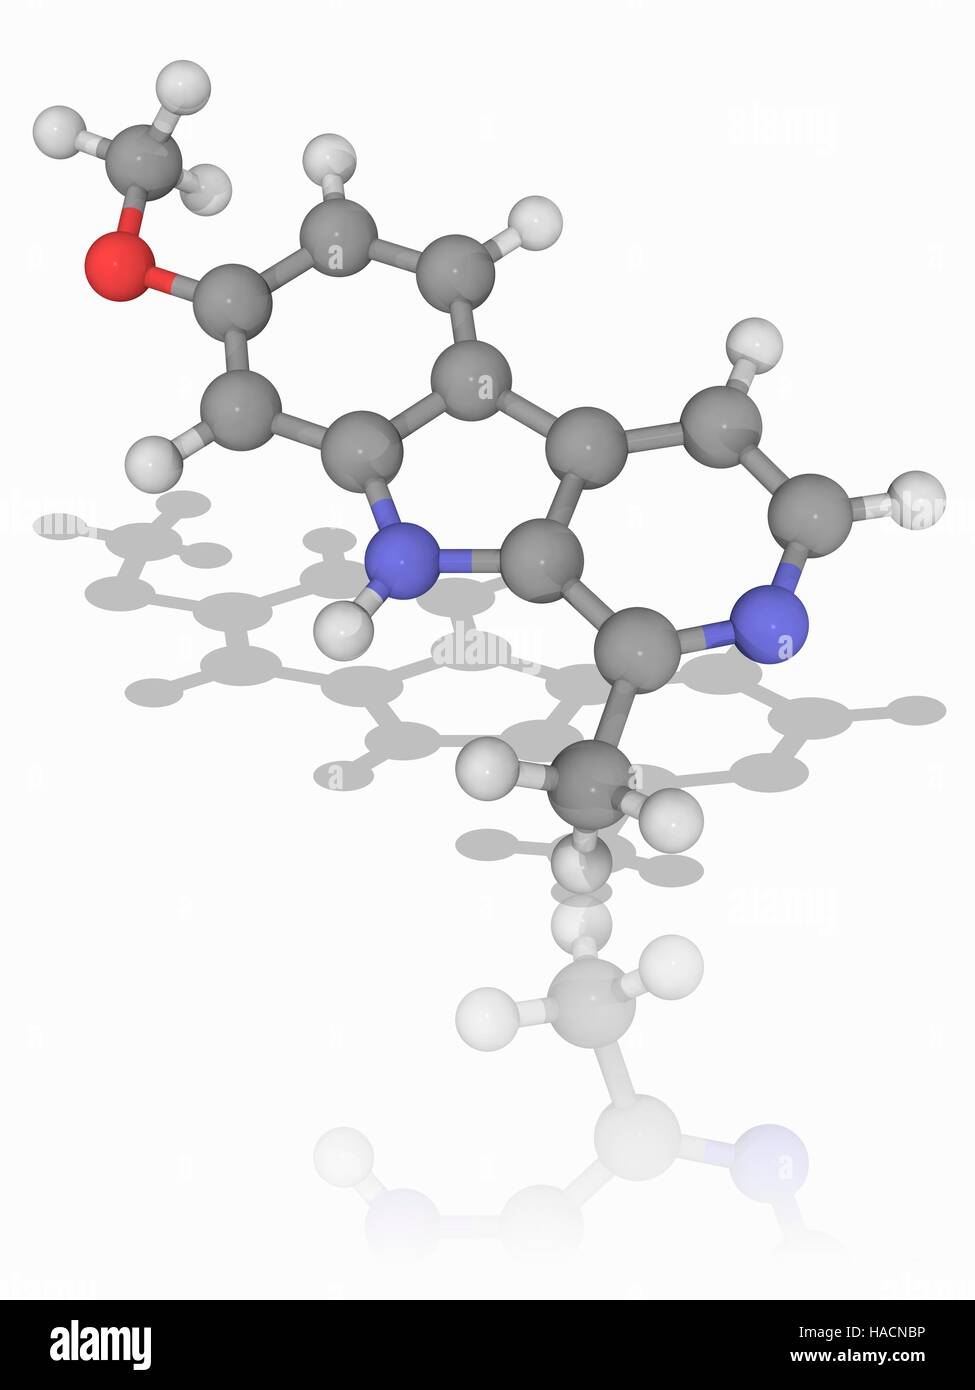 Harmine. Molecular model of the drug harmine (C13.H12.N2.O), a fluorescent harmala alkaloid that occurs in several different plants. As a drug, it slows the breakdown of neurotransmitters by reversibly inhibiting the enzyme monoamine oxidase A. Atoms are represented as spheres and are colour-coded: carbon (grey), hydrogen (white), nitrogen (blue) and oxygen (red). Illustration. Stock Photo